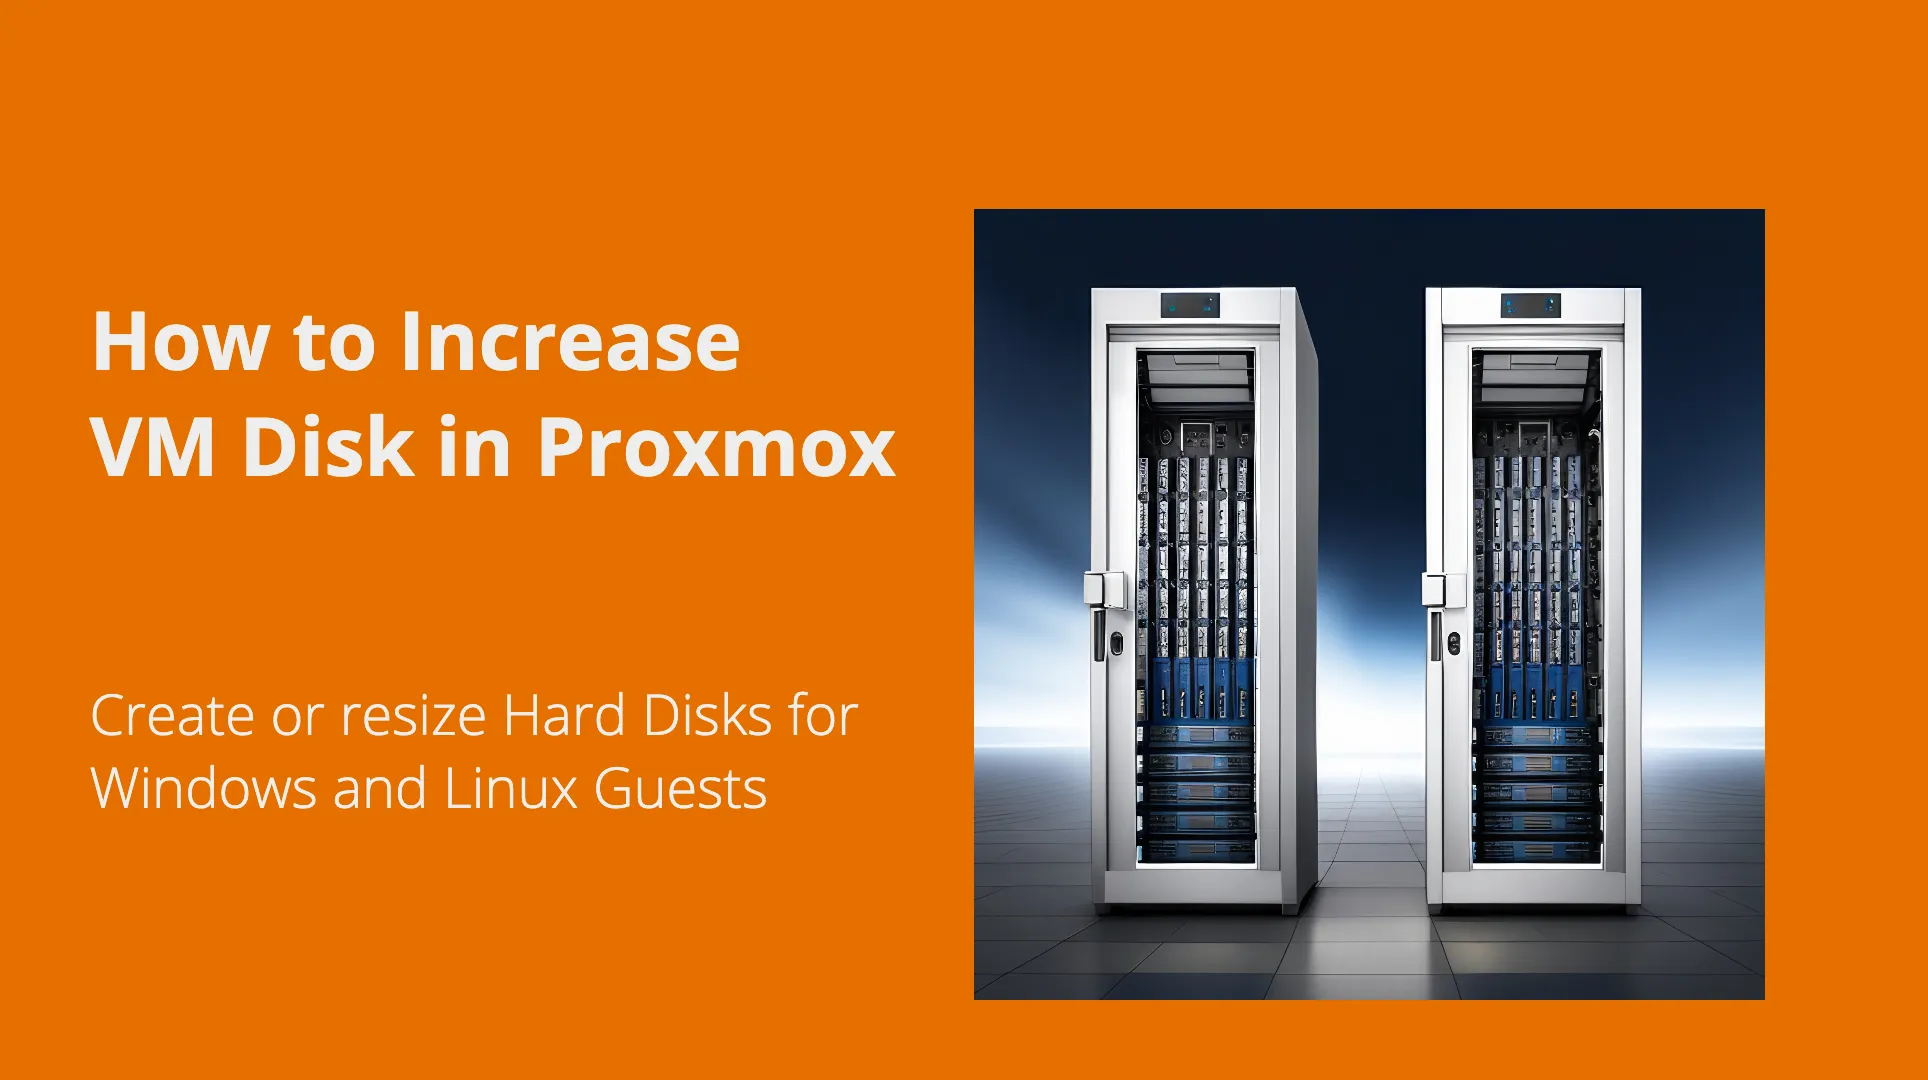 How to increase VM Disk in Proxmox